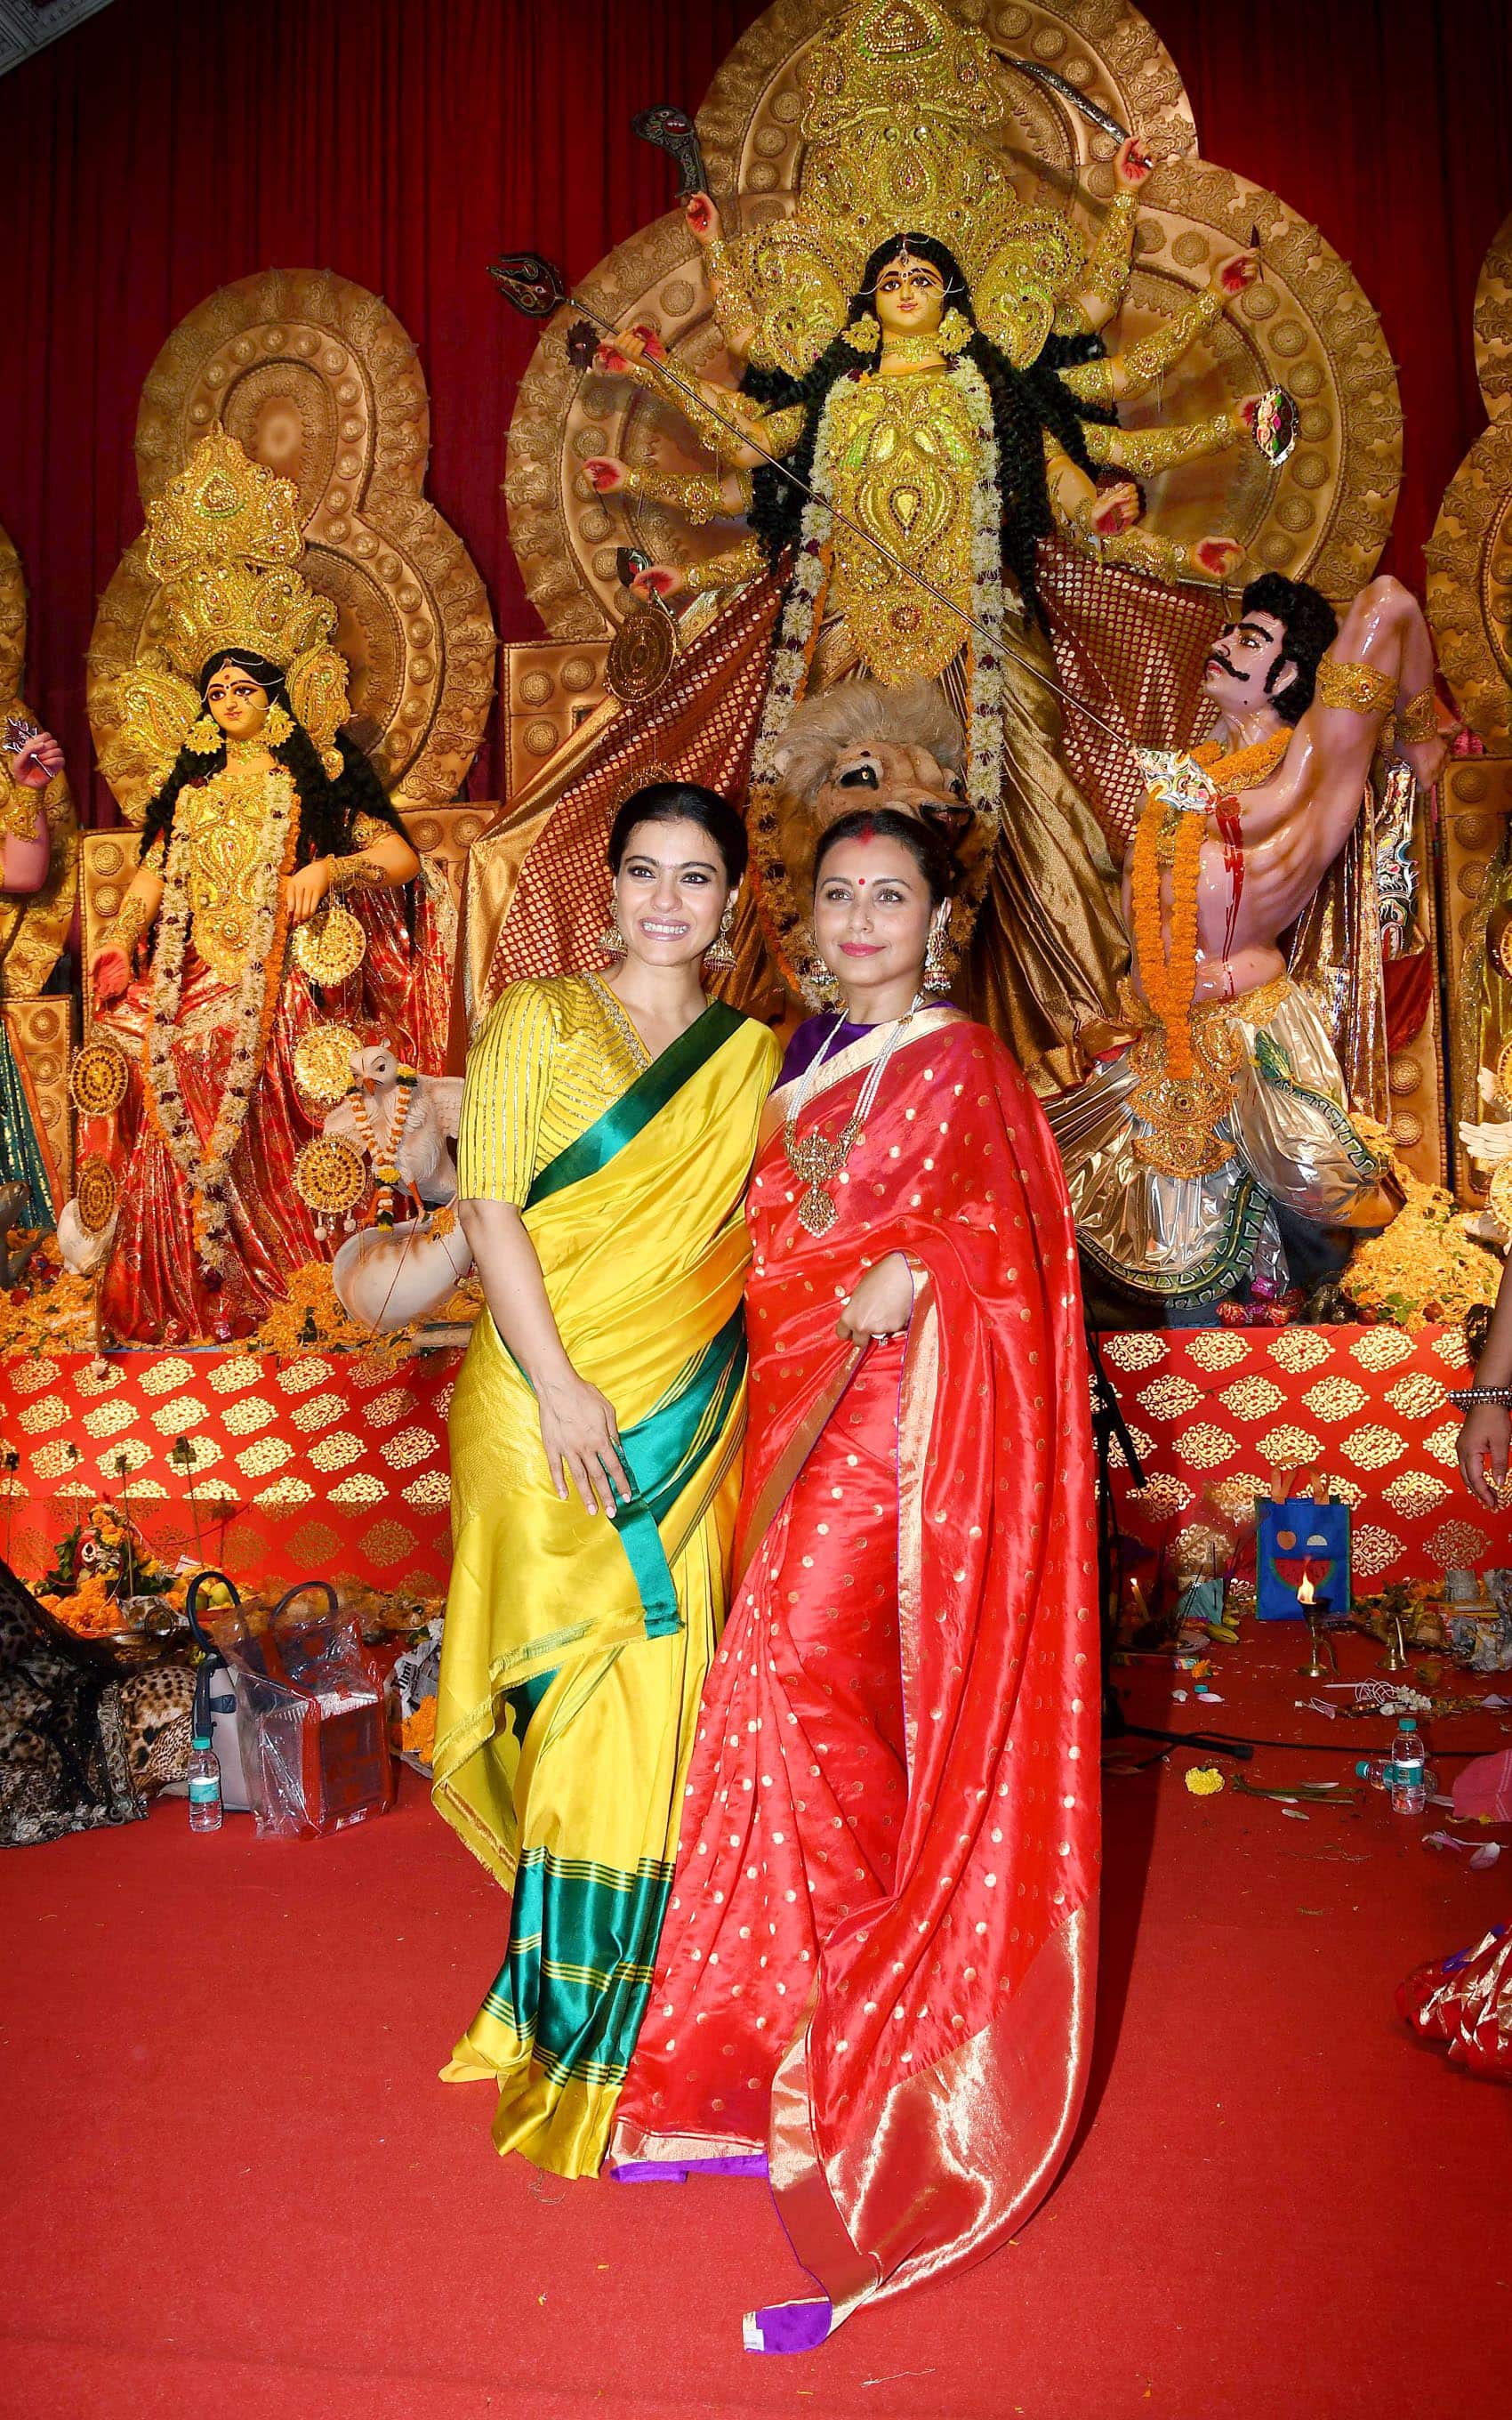 Here's another one from Durga Puja!